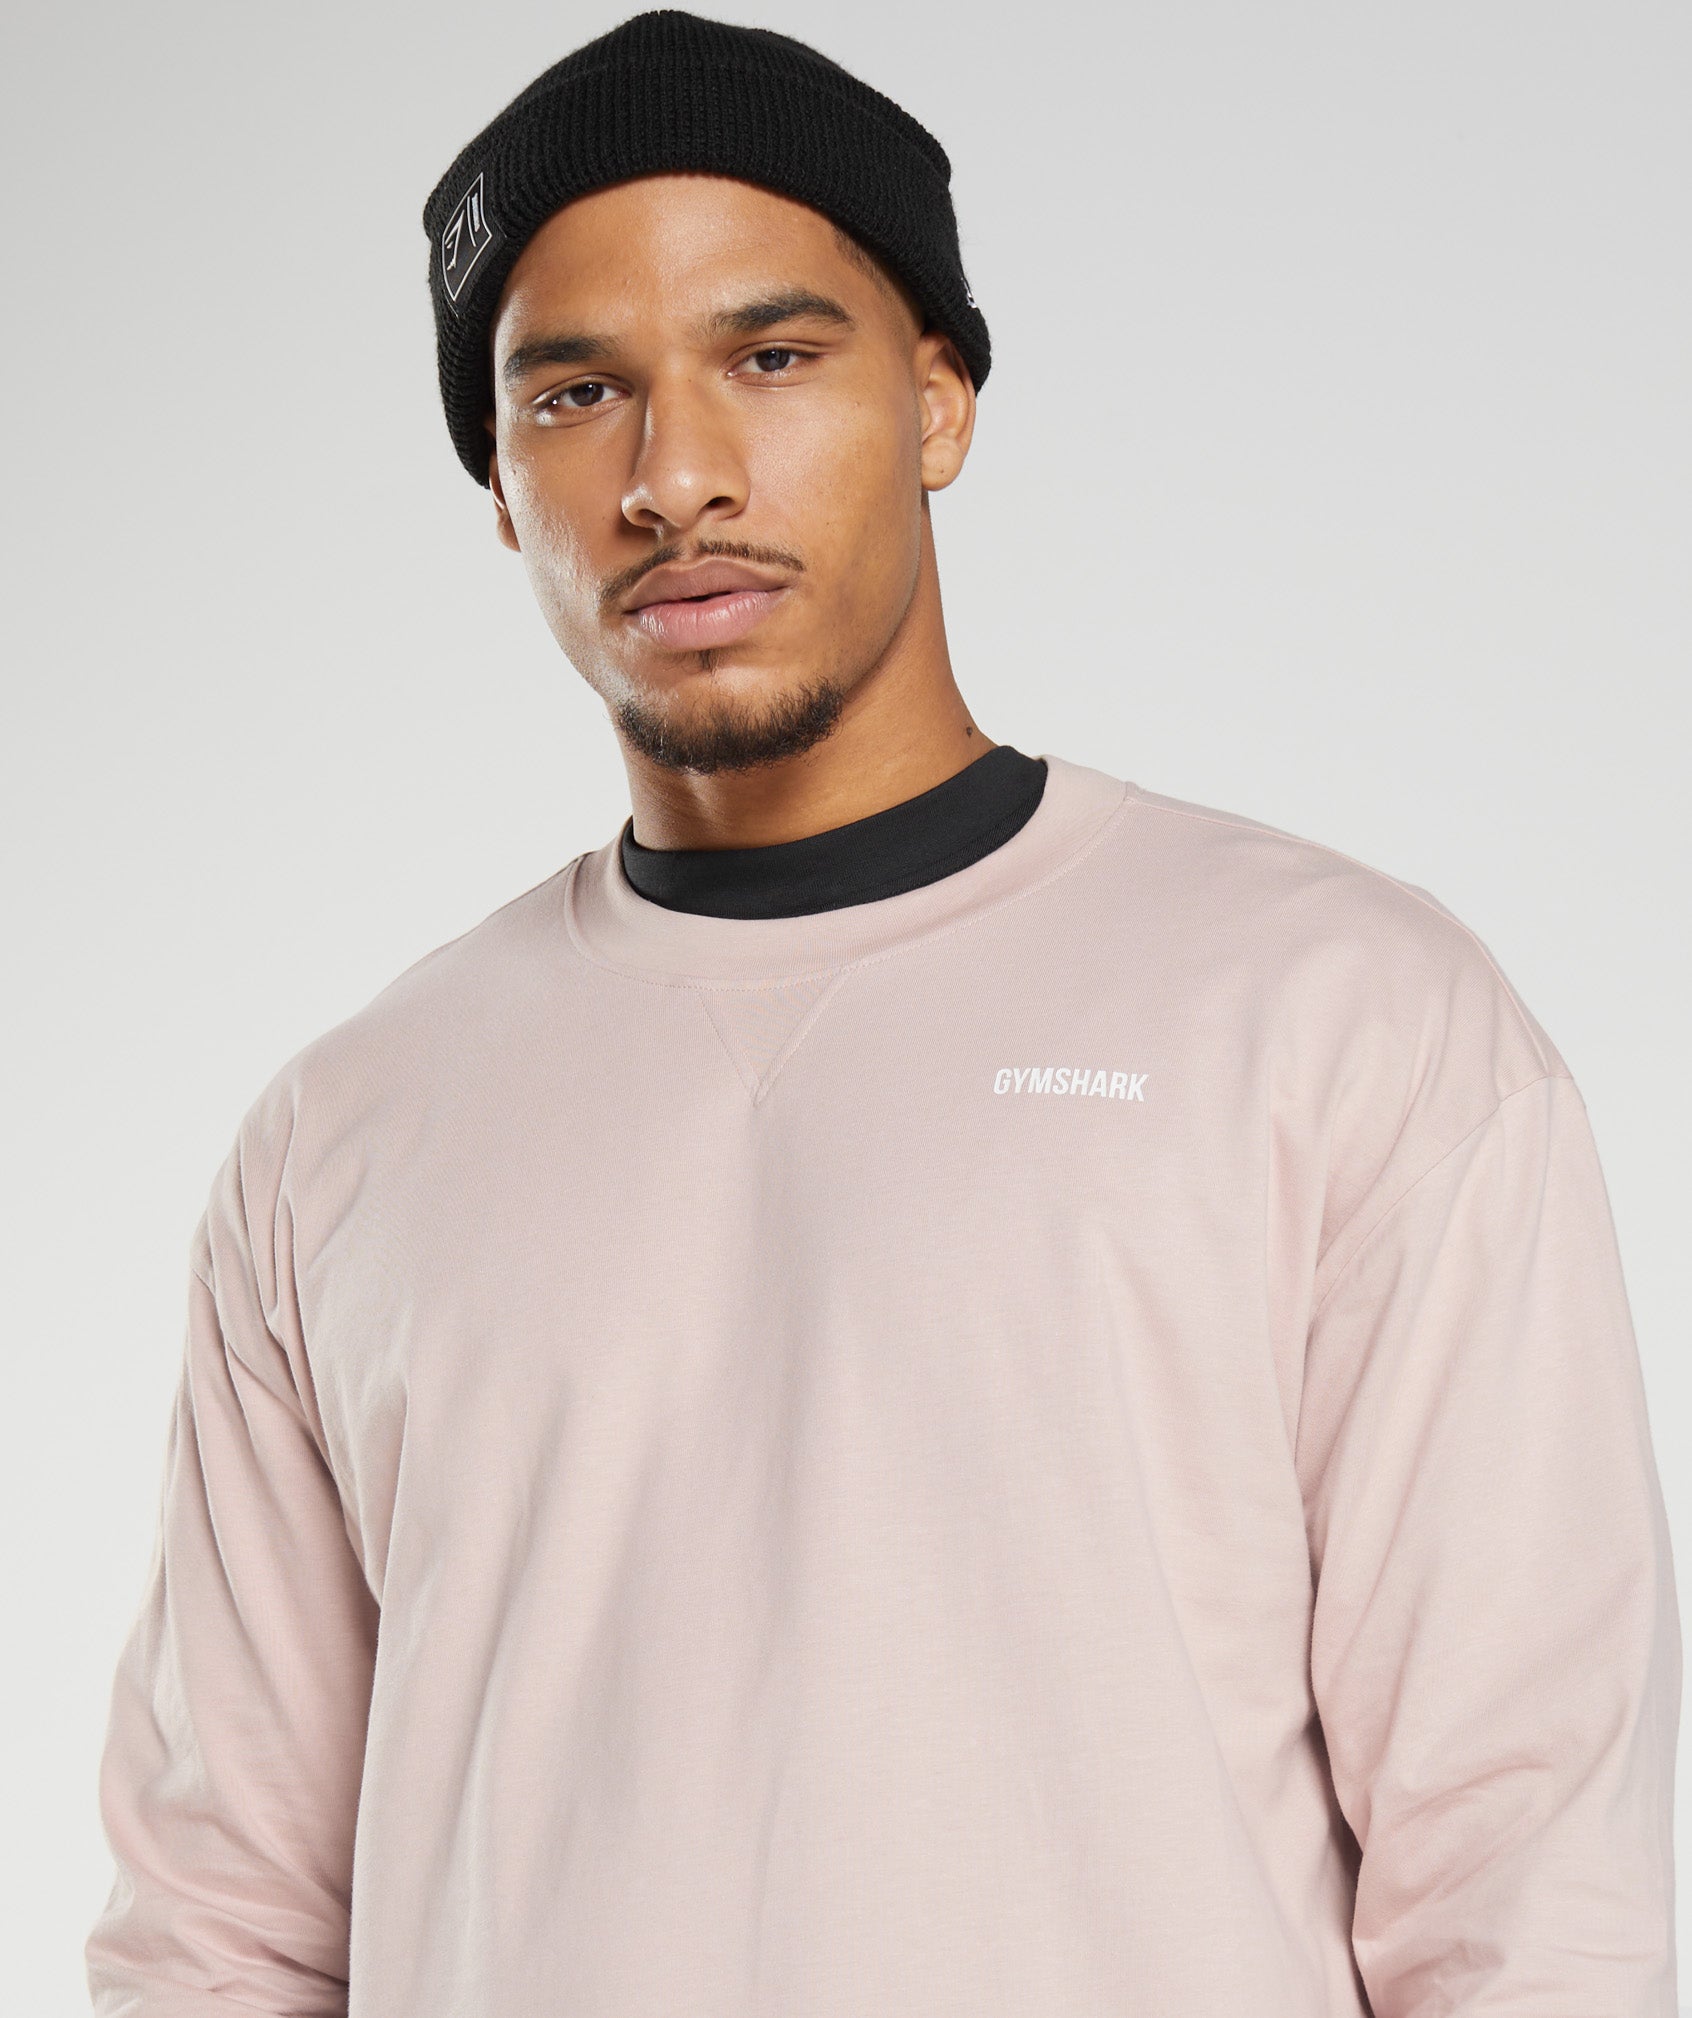 Rest Day Sweats Long Sleeve T-Shirt in Dusty Taupe - view 7